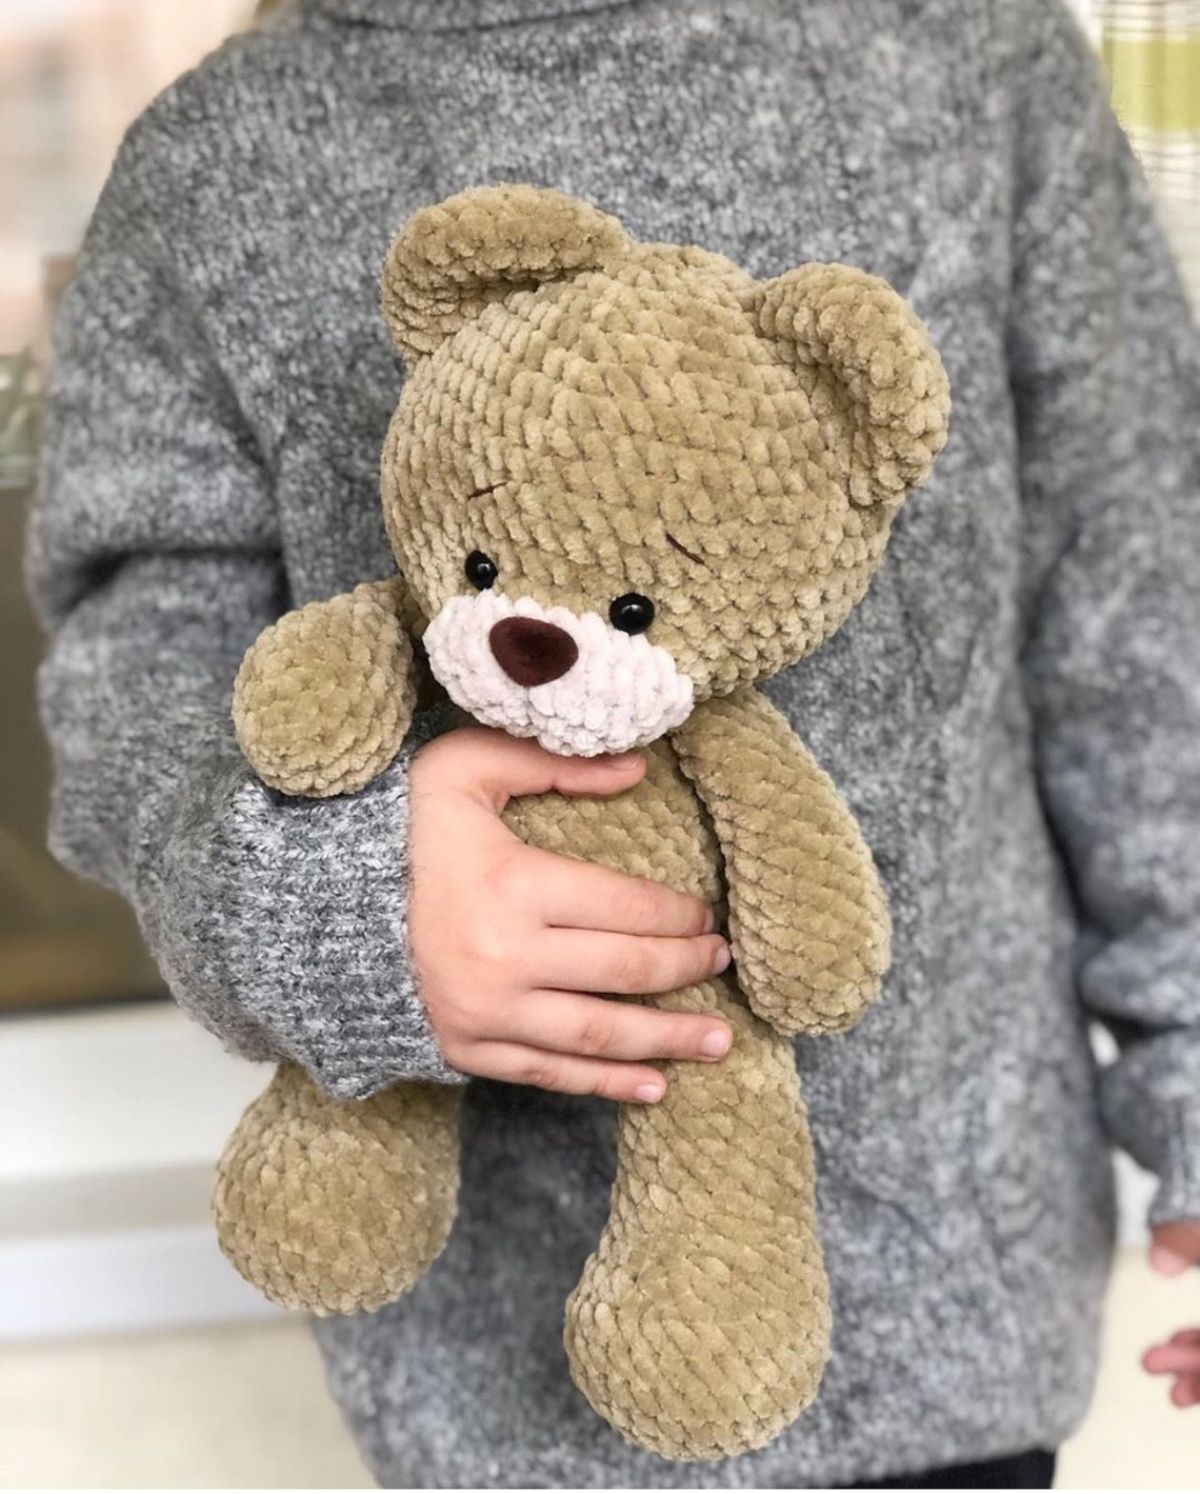 A hand holding a large crochet teddy bear with a dark brown nose, white mouth, and a light brown face, body, and legs.